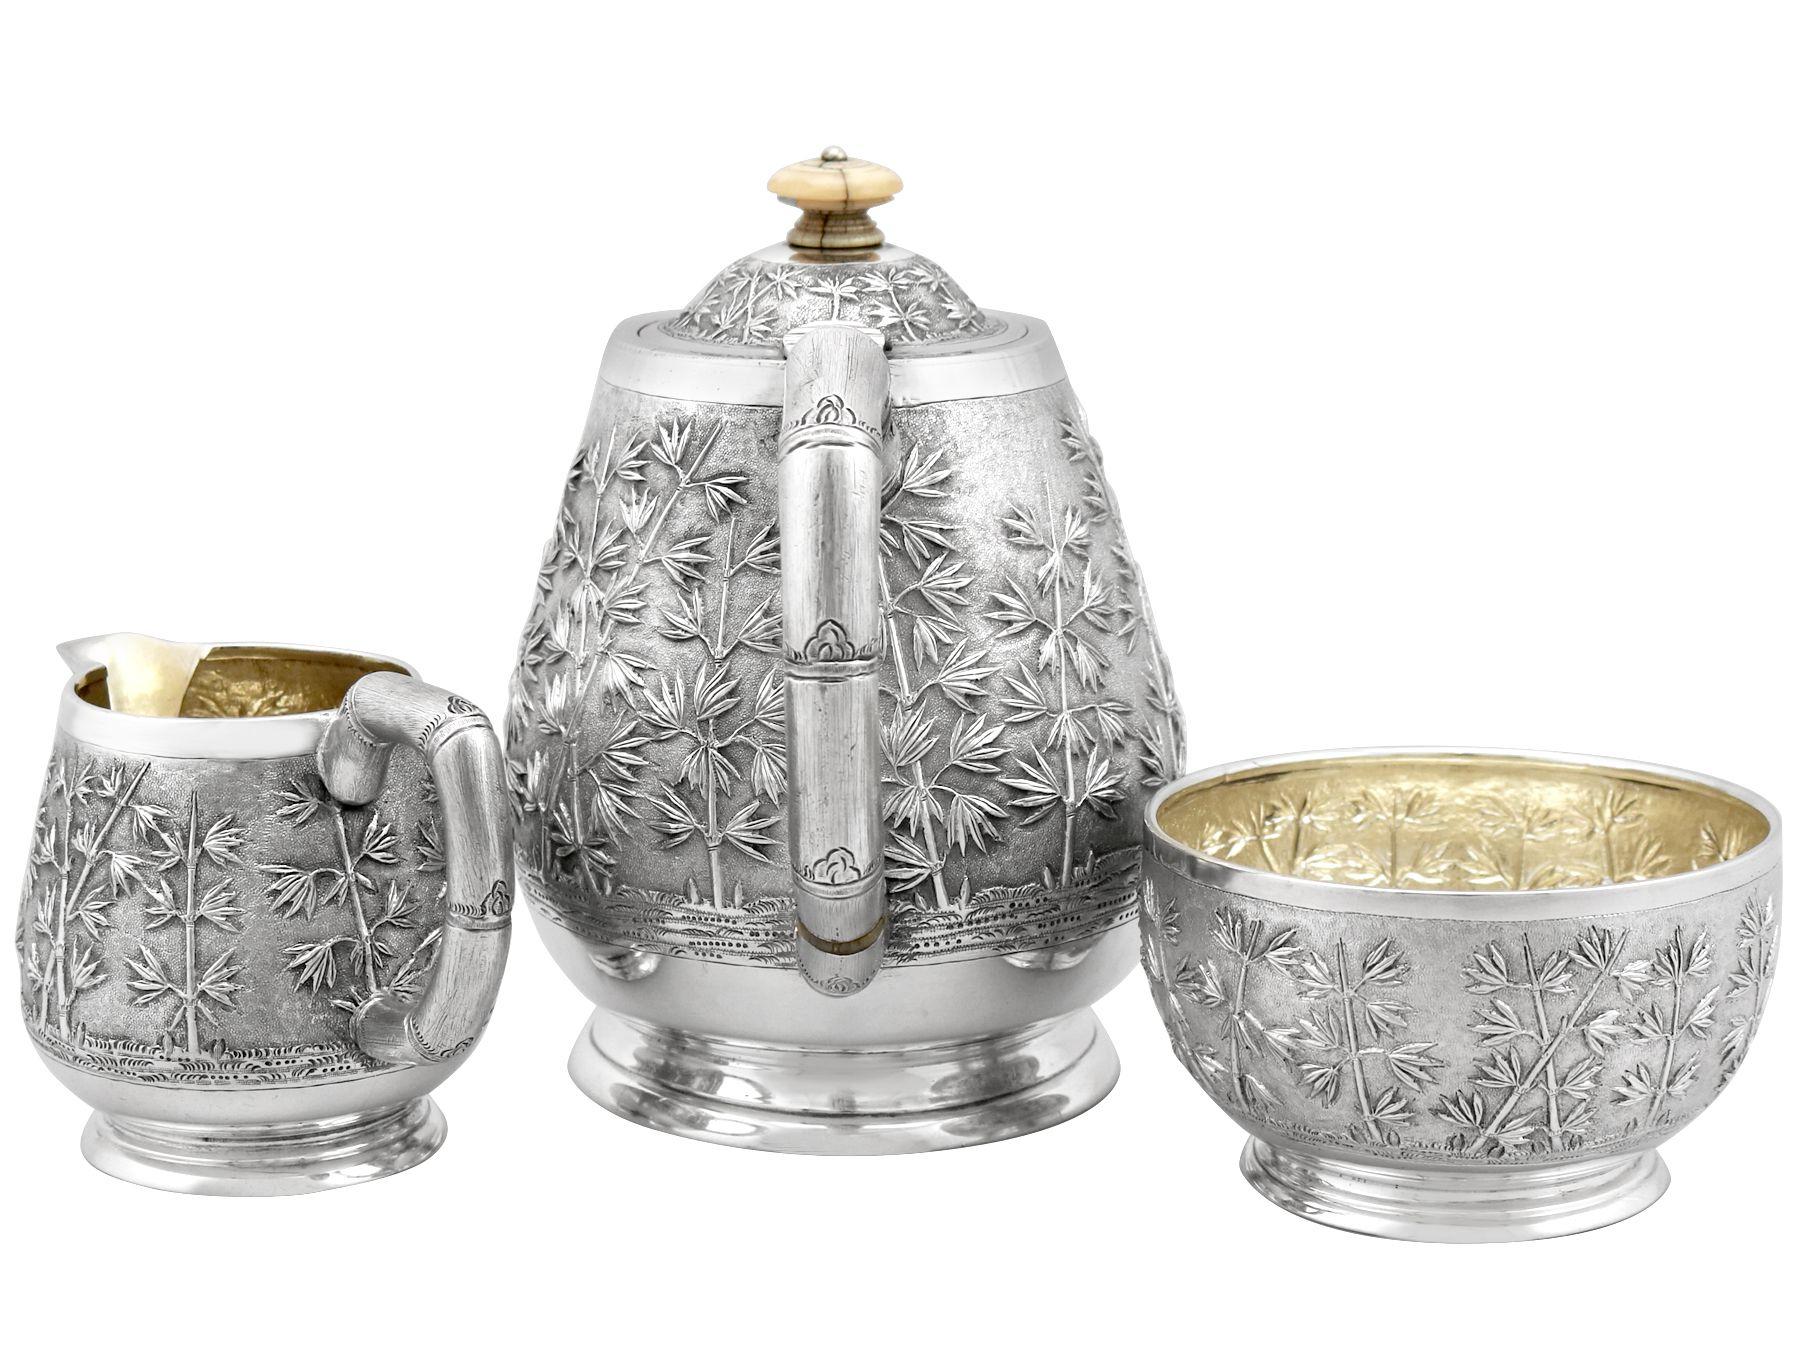 Antique Indian Silver Three Piece Tea Service In Excellent Condition For Sale In Jesmond, Newcastle Upon Tyne